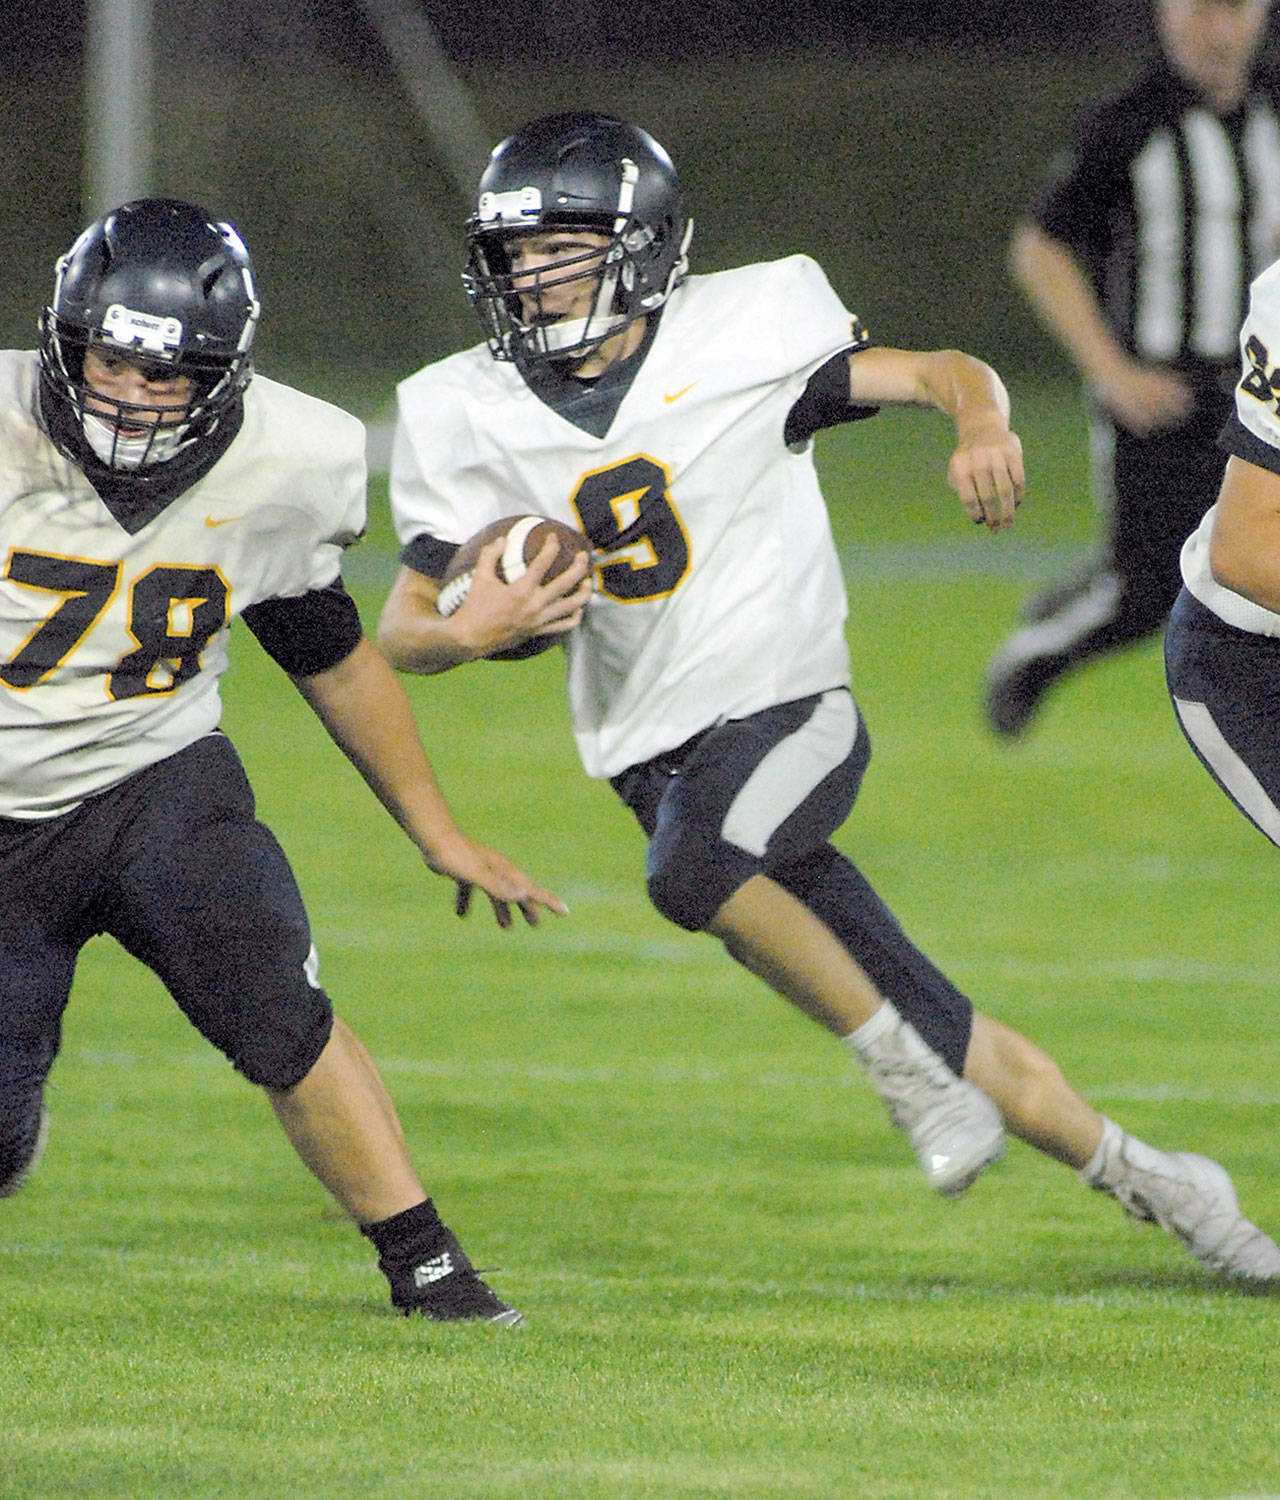 Forks’ Dalton Kilmer looks for a block from teammate Tyler Ellis during a game against Port Angeles in September. Currently a Class 1A school, the Spartans will be re-classified as a 2B school beginning next school year. (Keith Thorpe/Peninsula Daily News)